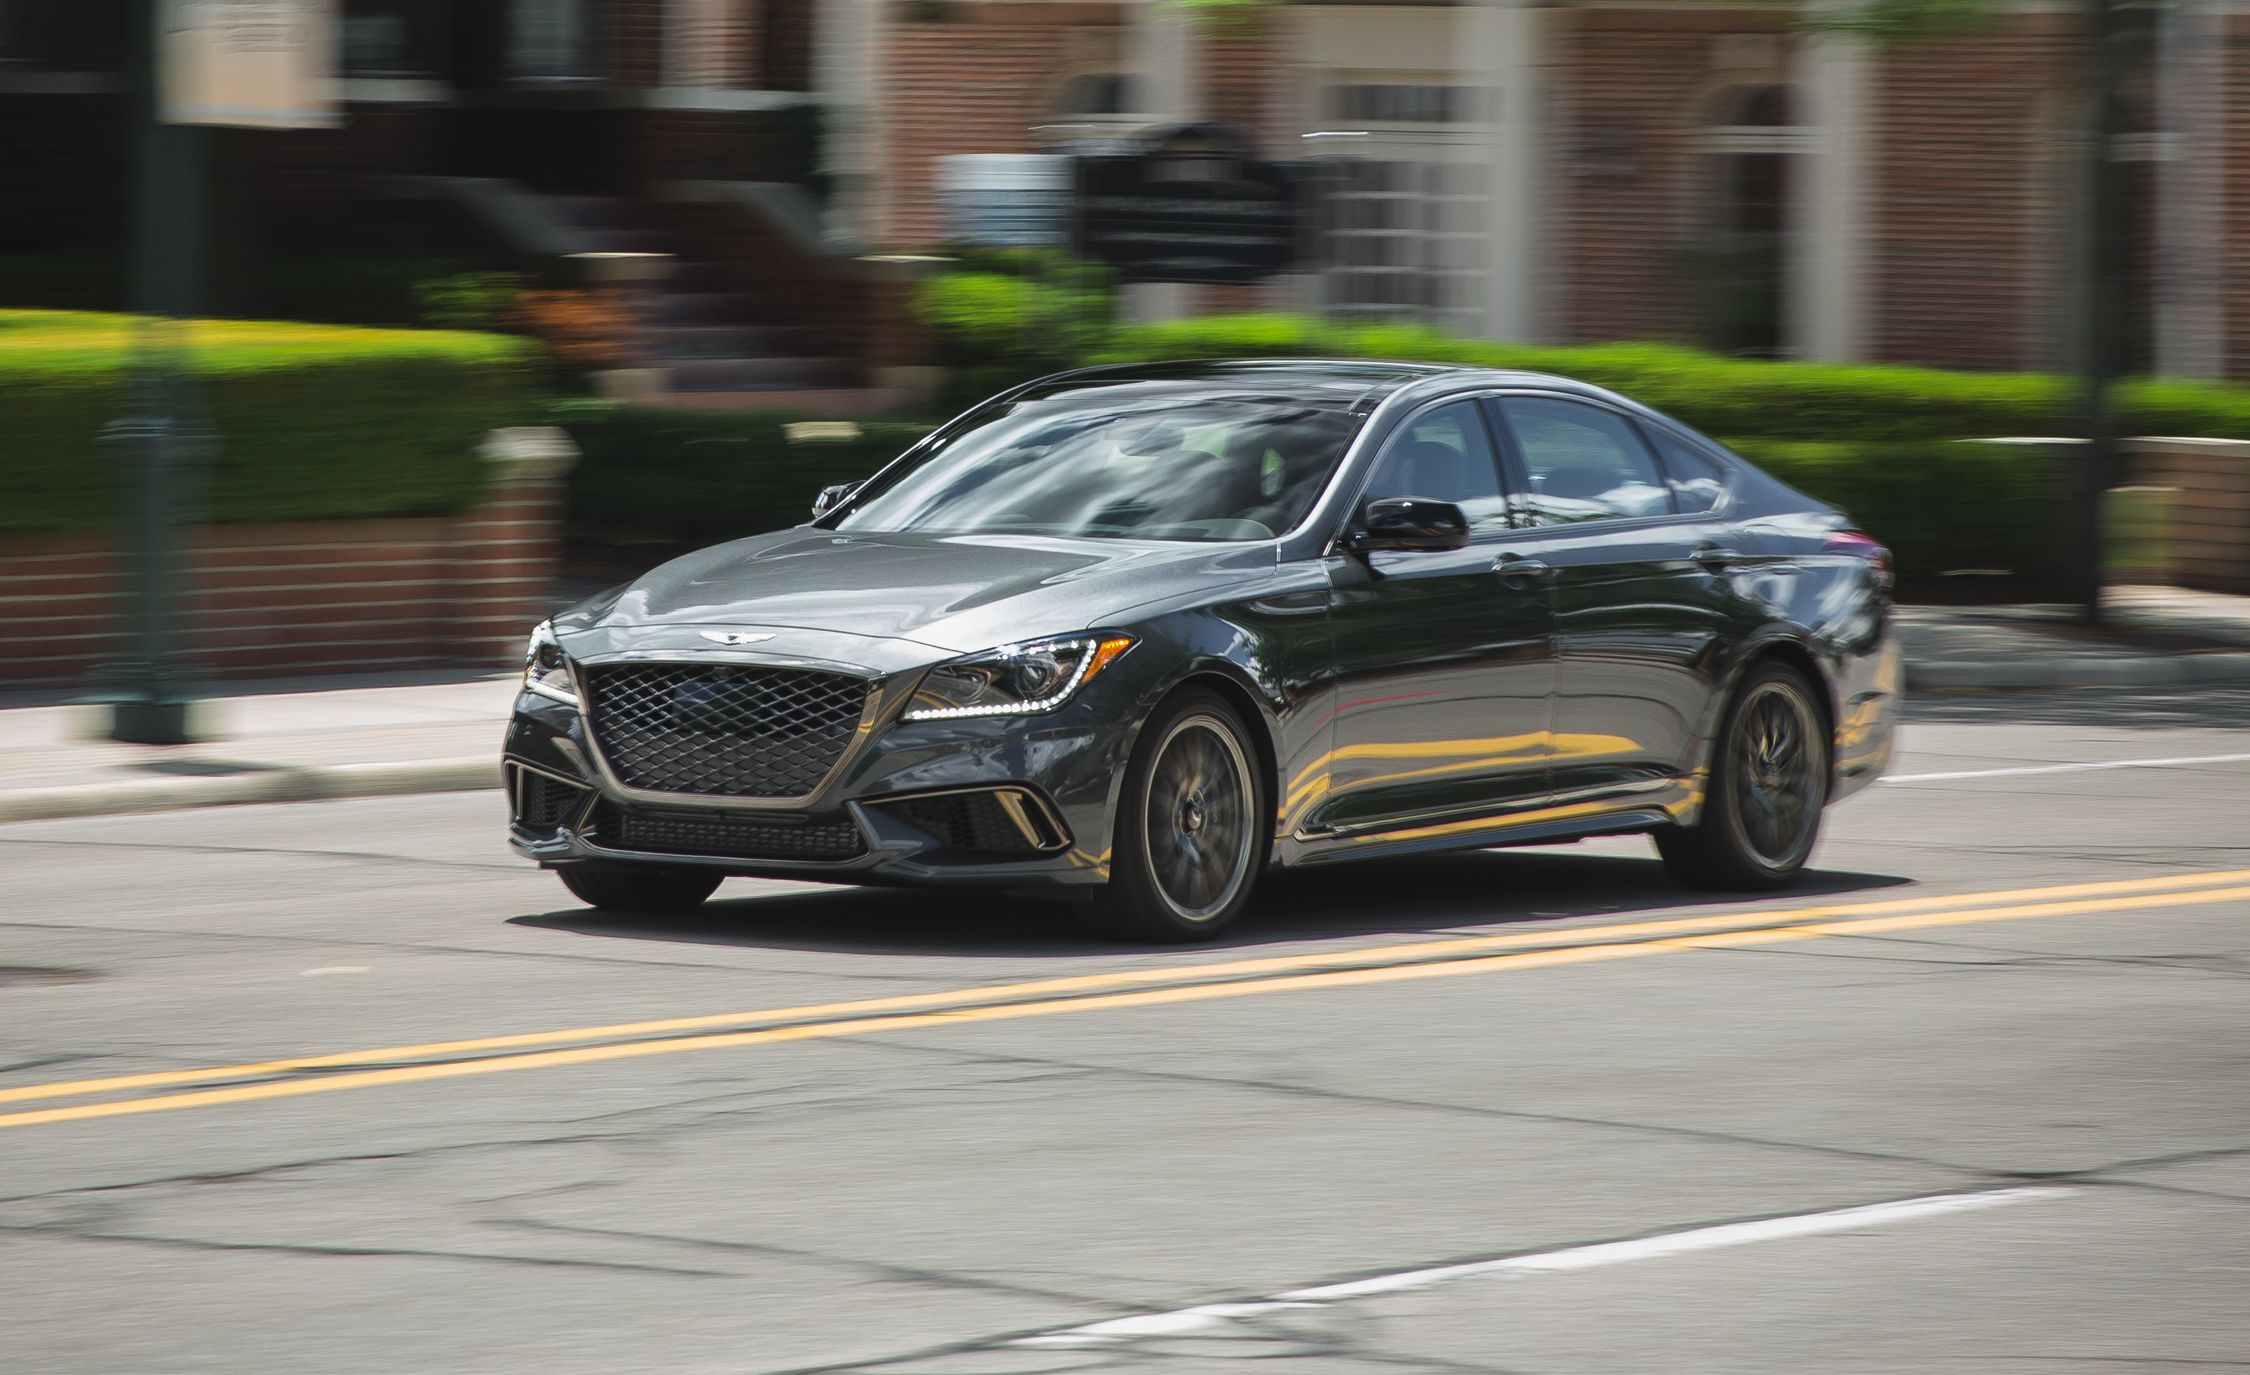 Genesis G80 Reviews | Genesis G80 Price, Photos, and Specs | Car and Driver